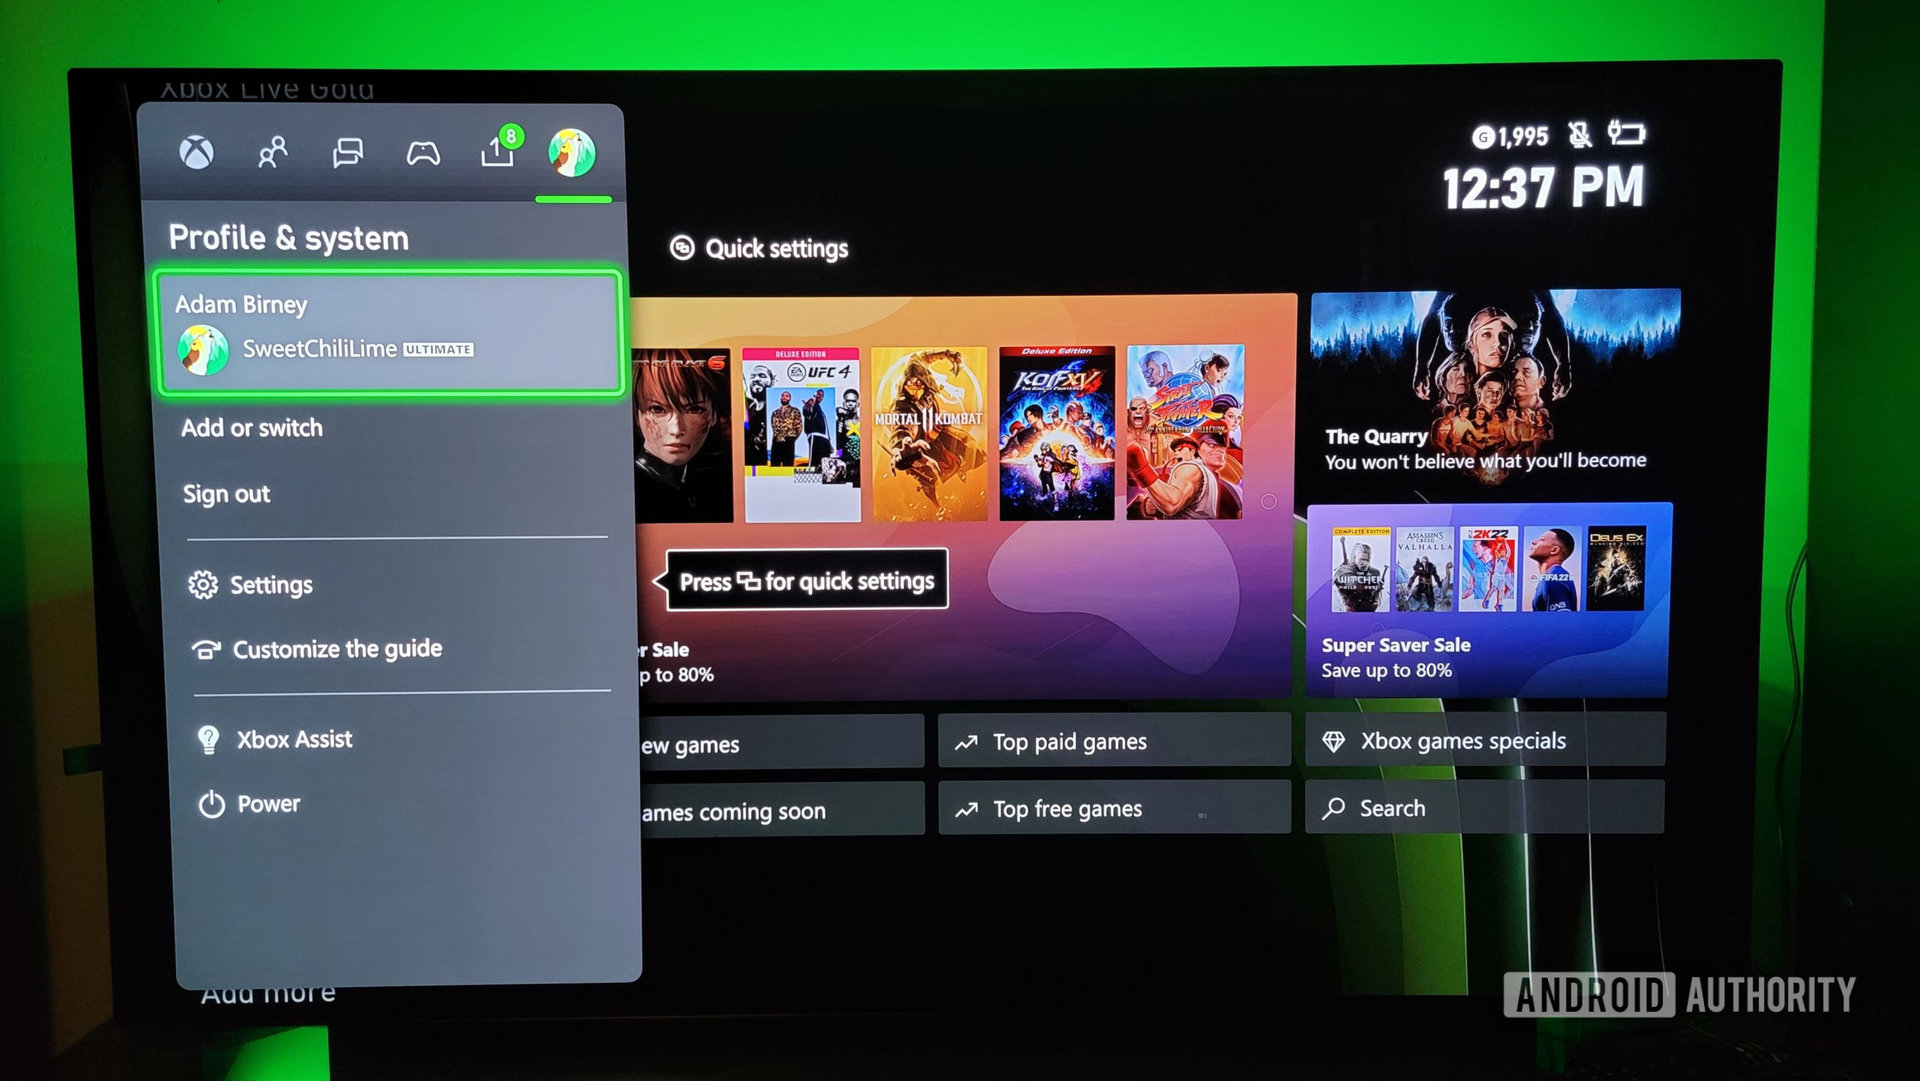 trimme de Tegn et billede How to change your Xbox Gamertag - Android Authority